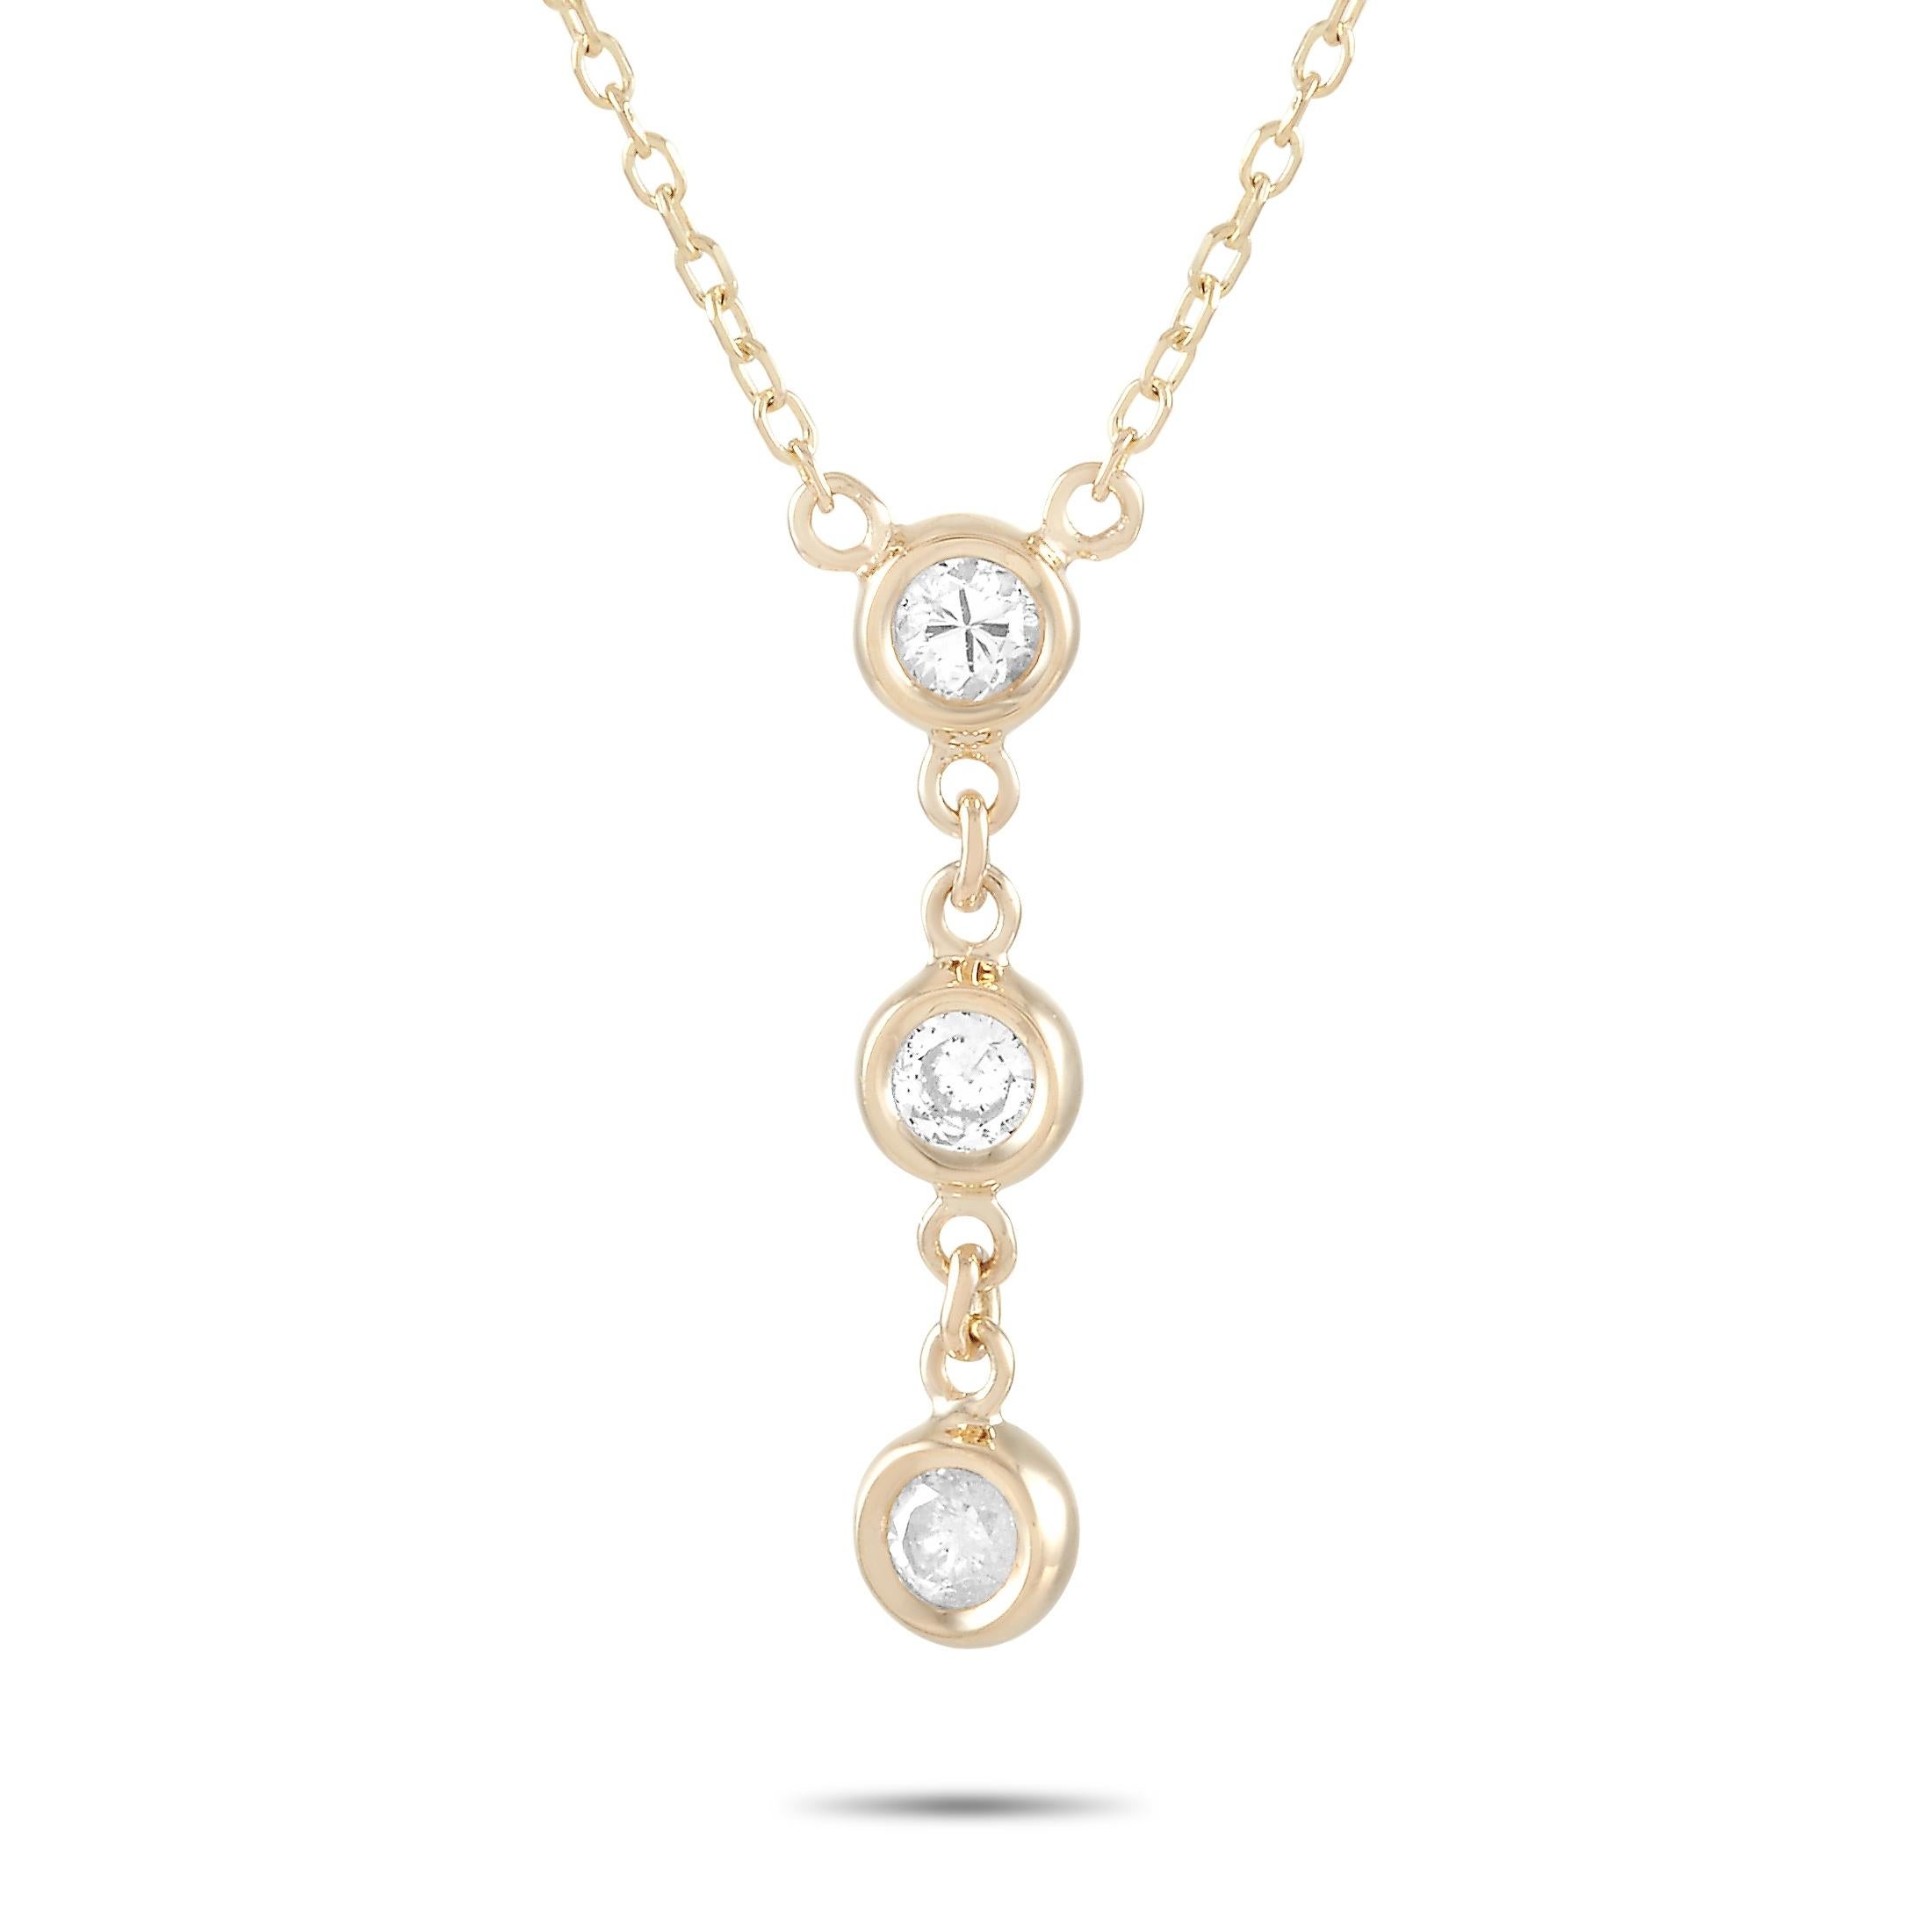 This LB Exclusive necklace is crafted from 14K yellow gold and weighs 1.4 grams. It is presented with a 15” chain and boasts a pendant that measures 0.68” in length and 0.13” in width. The necklace is set with diamonds that total 0.15